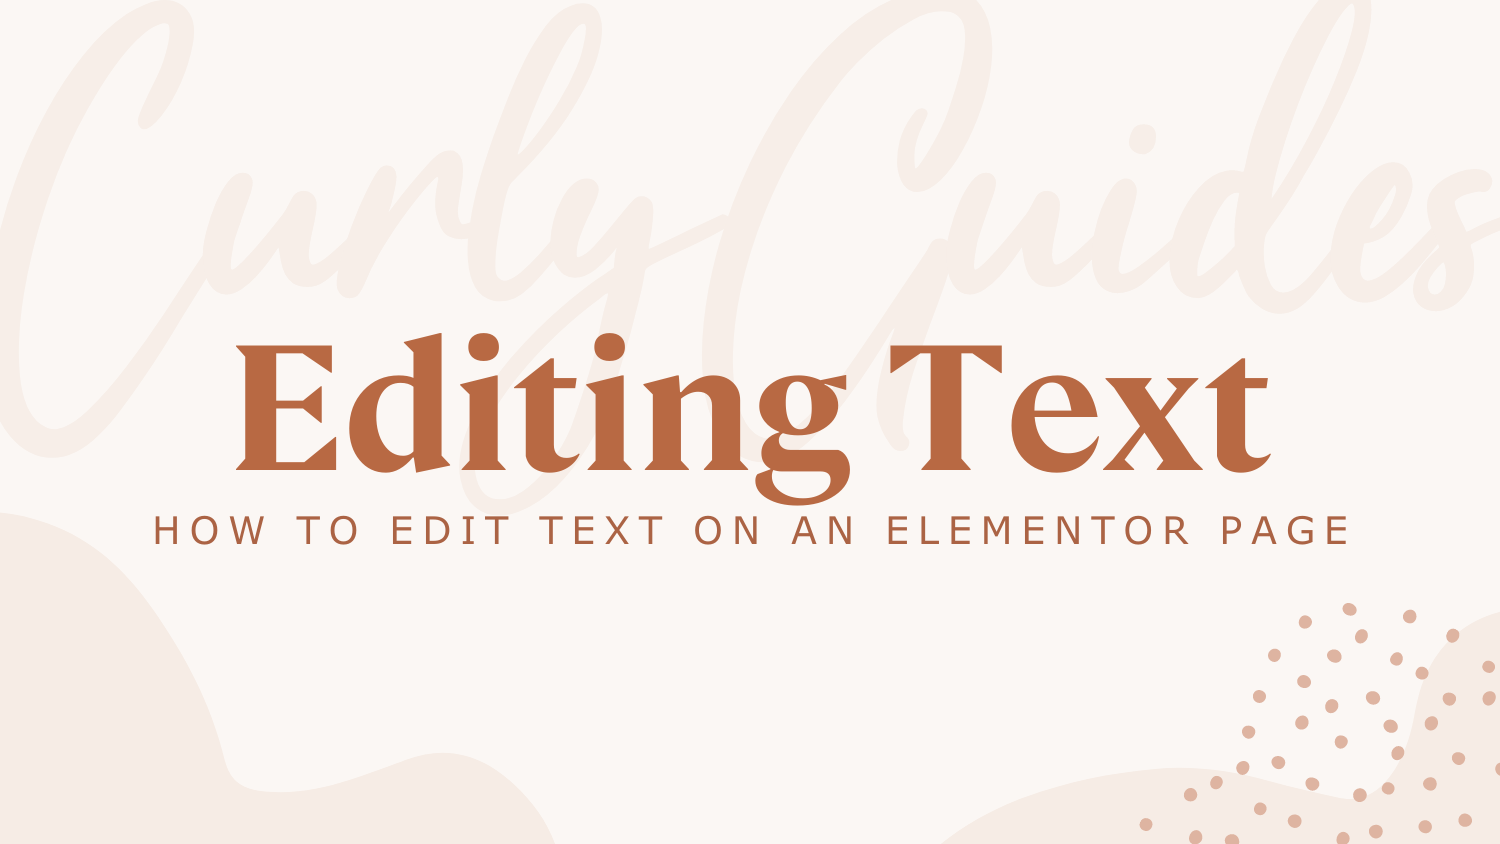 How To Edit Text On An Elementor Page